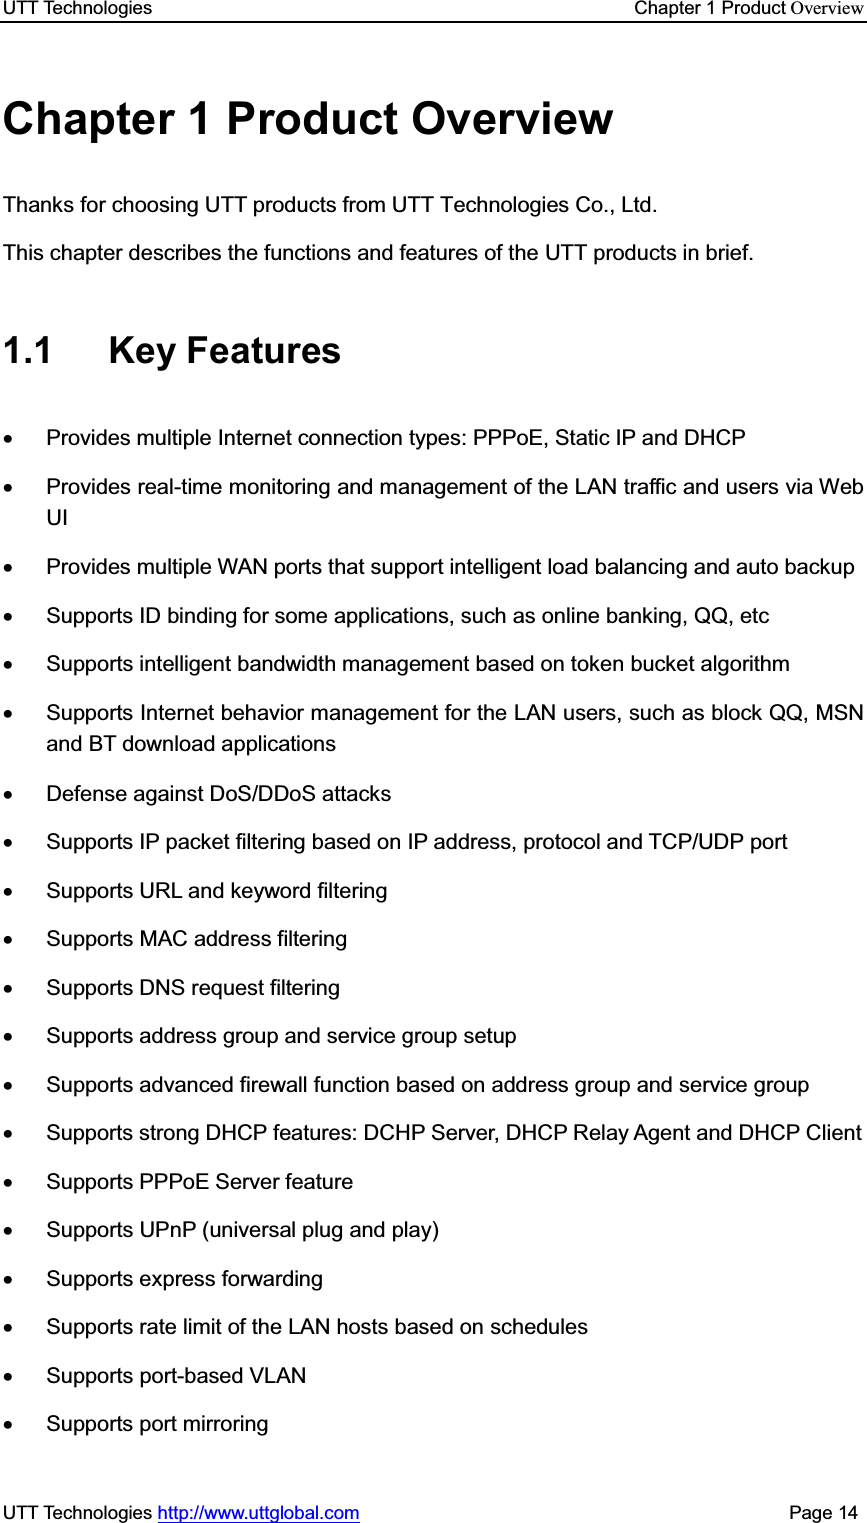 UTT Technologies    Chapter 1 Product OverviewUTT Technologies http://www.uttglobal.com                                              Page 14 Chapter 1 Product Overview Thanks for choosing UTT products from UTT Technologies Co., Ltd. This chapter describes the functions and features of the UTT products in brief. 1.1 Key Features x  Provides multiple Internet connection types: PPPoE, Static IP and DHCP x  Provides real-time monitoring and management of the LAN traffic and users via Web UI x  Provides multiple WAN ports that support intelligent load balancing and auto backup x  Supports ID binding for some applications, such as online banking, QQ, etc x  Supports intelligent bandwidth management based on token bucket algorithm x  Supports Internet behavior management for the LAN users, such as block QQ, MSN and BT download applications x Defense against DoS/DDoS attacks x  Supports IP packet filtering based on IP address, protocol and TCP/UDP port x  Supports URL and keyword filtering x  Supports MAC address filtering x Supports DNS request filtering x  Supports address group and service group setup x  Supports advanced firewall function based on address group and service group x  Supports strong DHCP features: DCHP Server, DHCP Relay Agent and DHCP Client x Supports PPPoE Server feature x  Supports UPnP (universal plug and play) x Supports express forwarding x  Supports rate limit of the LAN hosts based on schedules x Supports port-based VLAN x  Supports port mirroring 